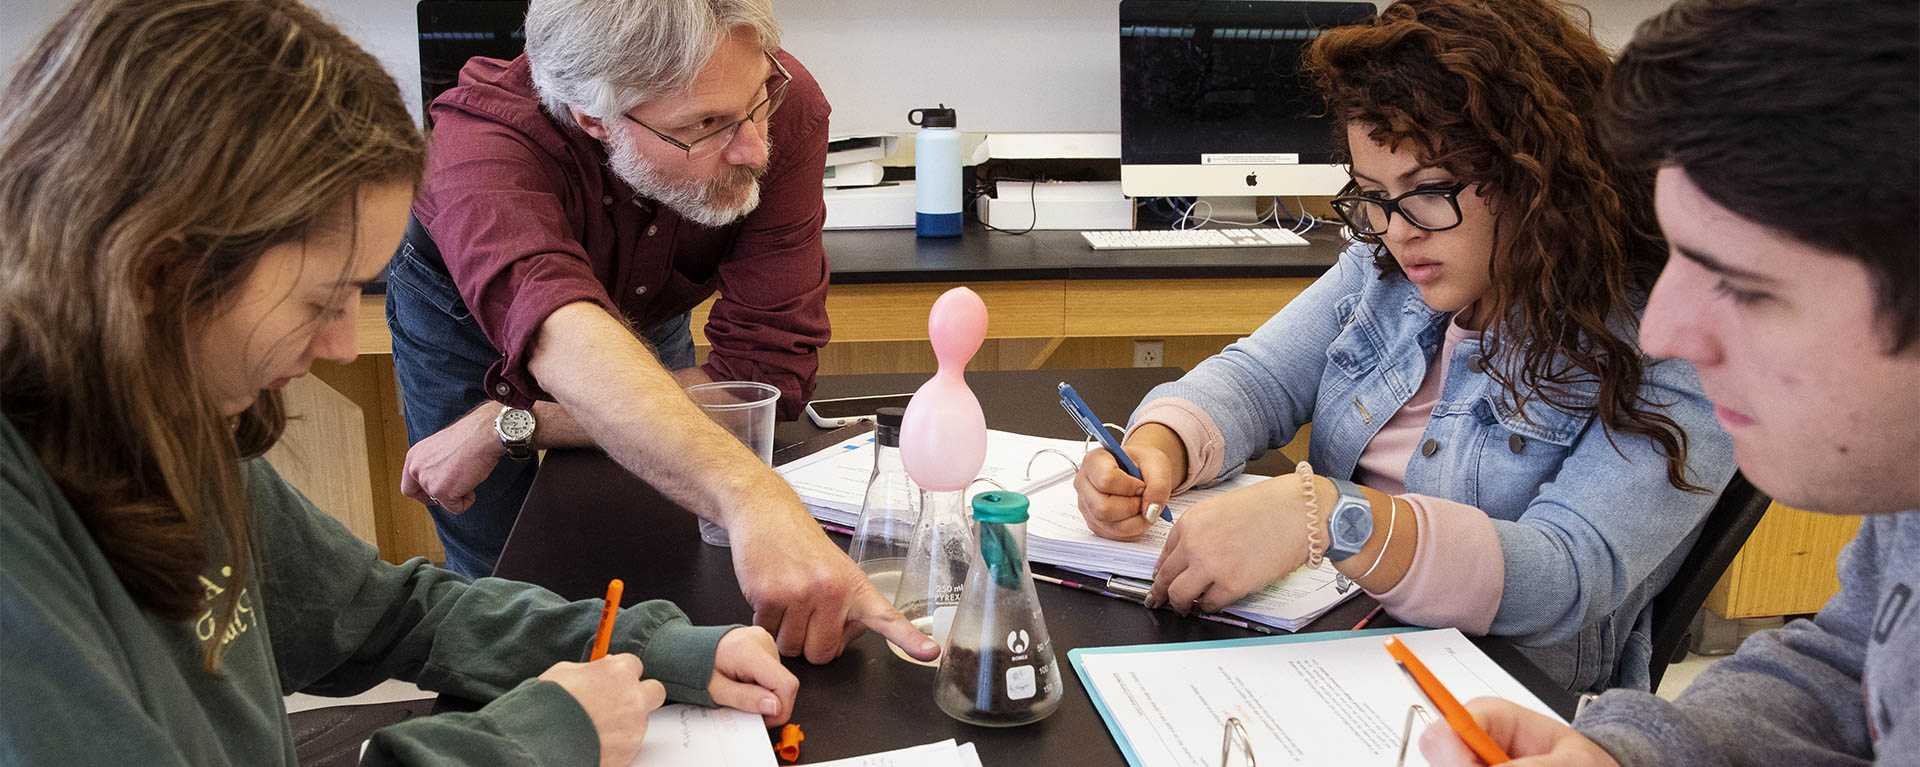 Dr. Thomas and two physics students examine a beaker during an experiment.